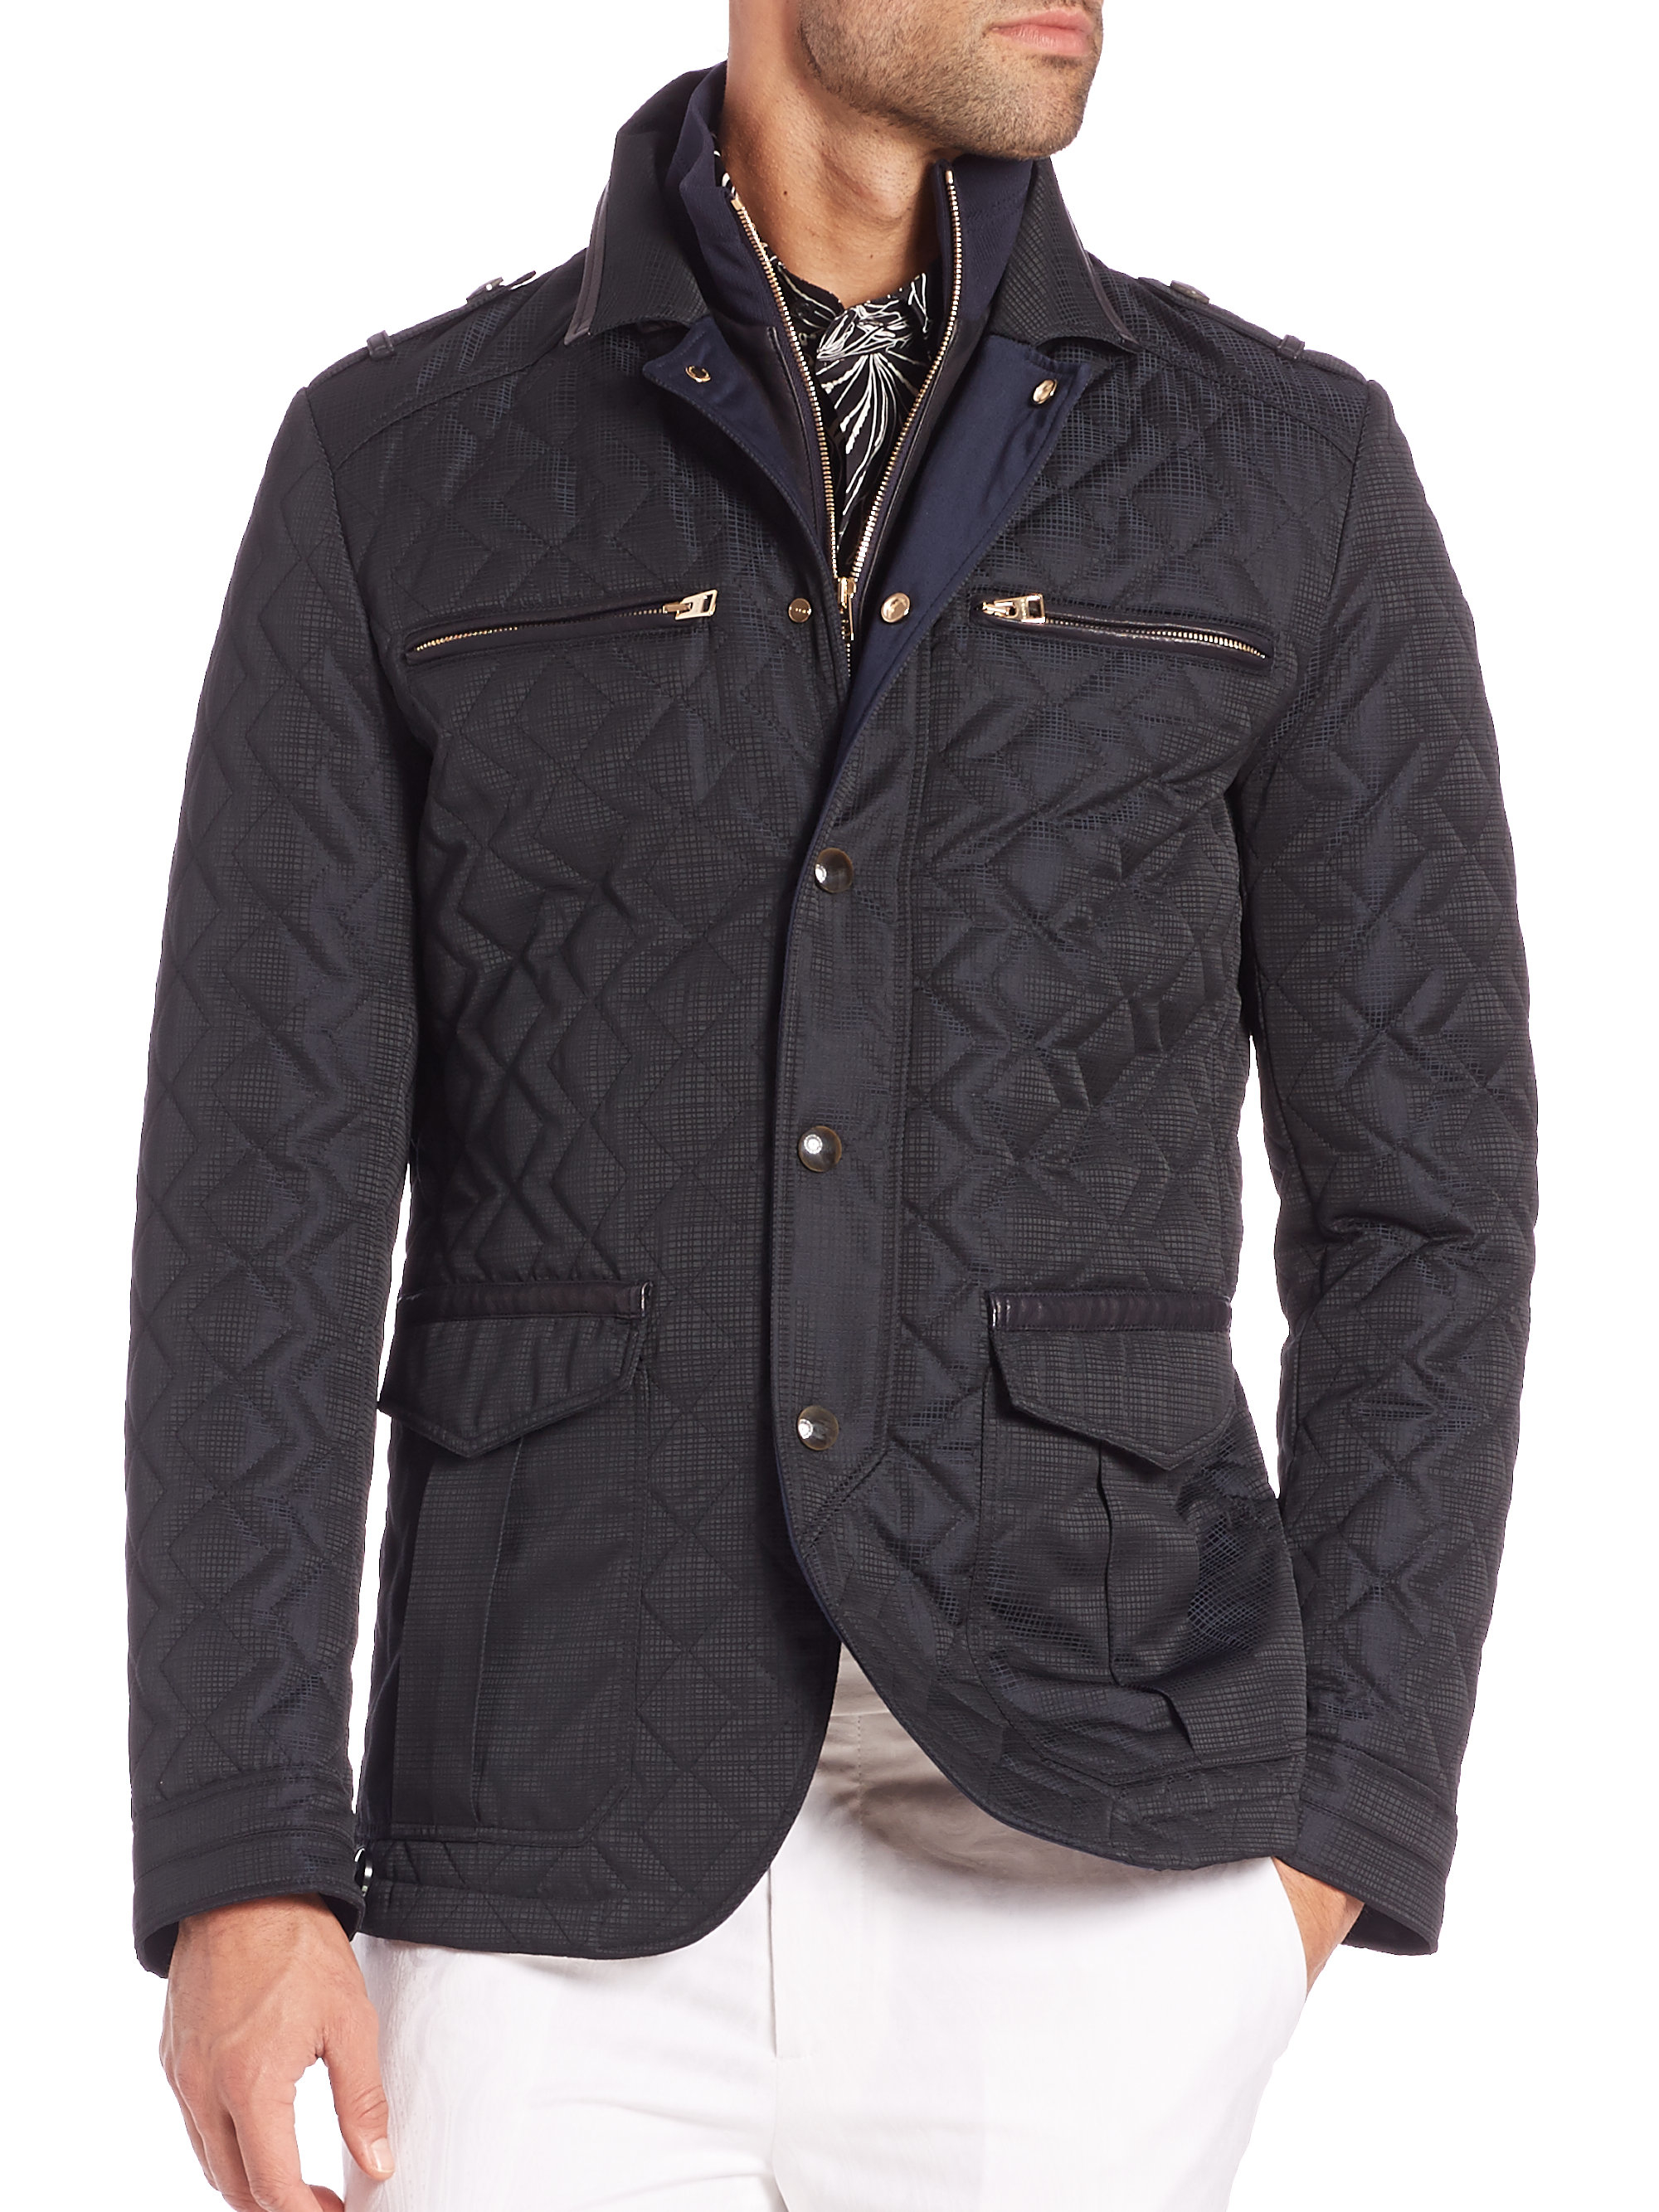 Lyst - Etro Quilted Broken Plaid Jacket in Blue for Men